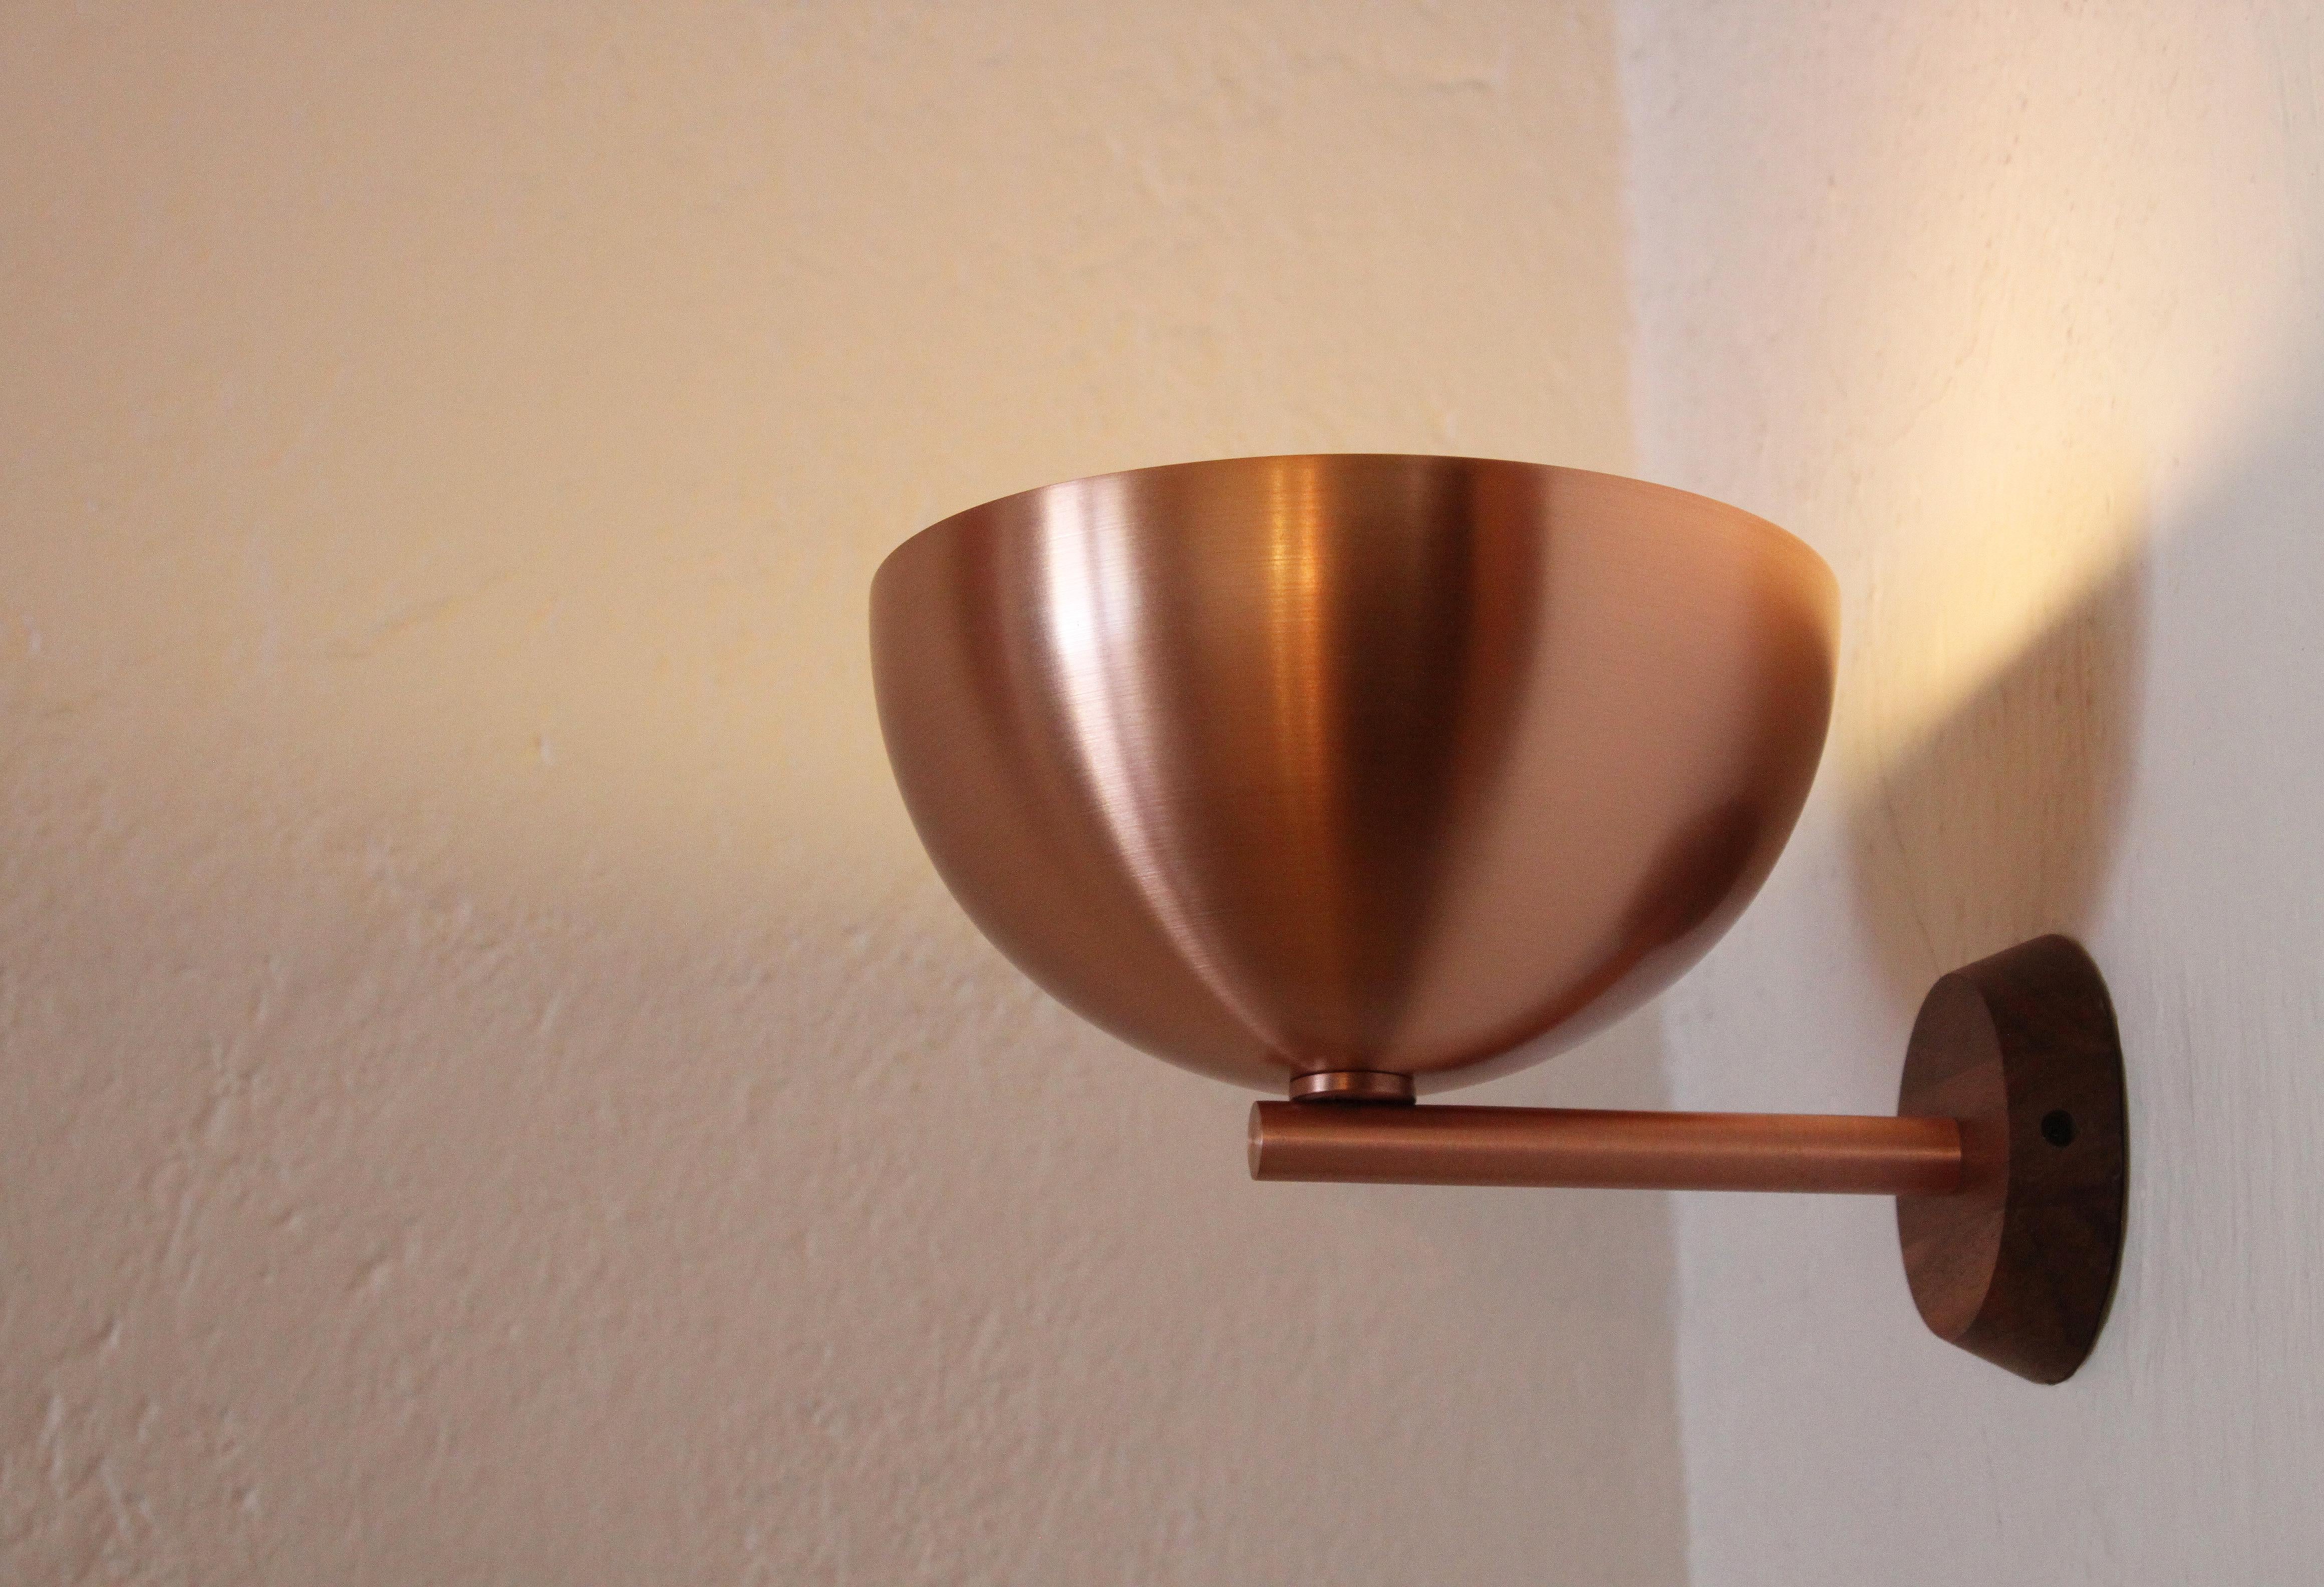 Copper Clasica A Muro Wall Sconce by Maria Beckmann, Represented by Tuleste Factory For Sale